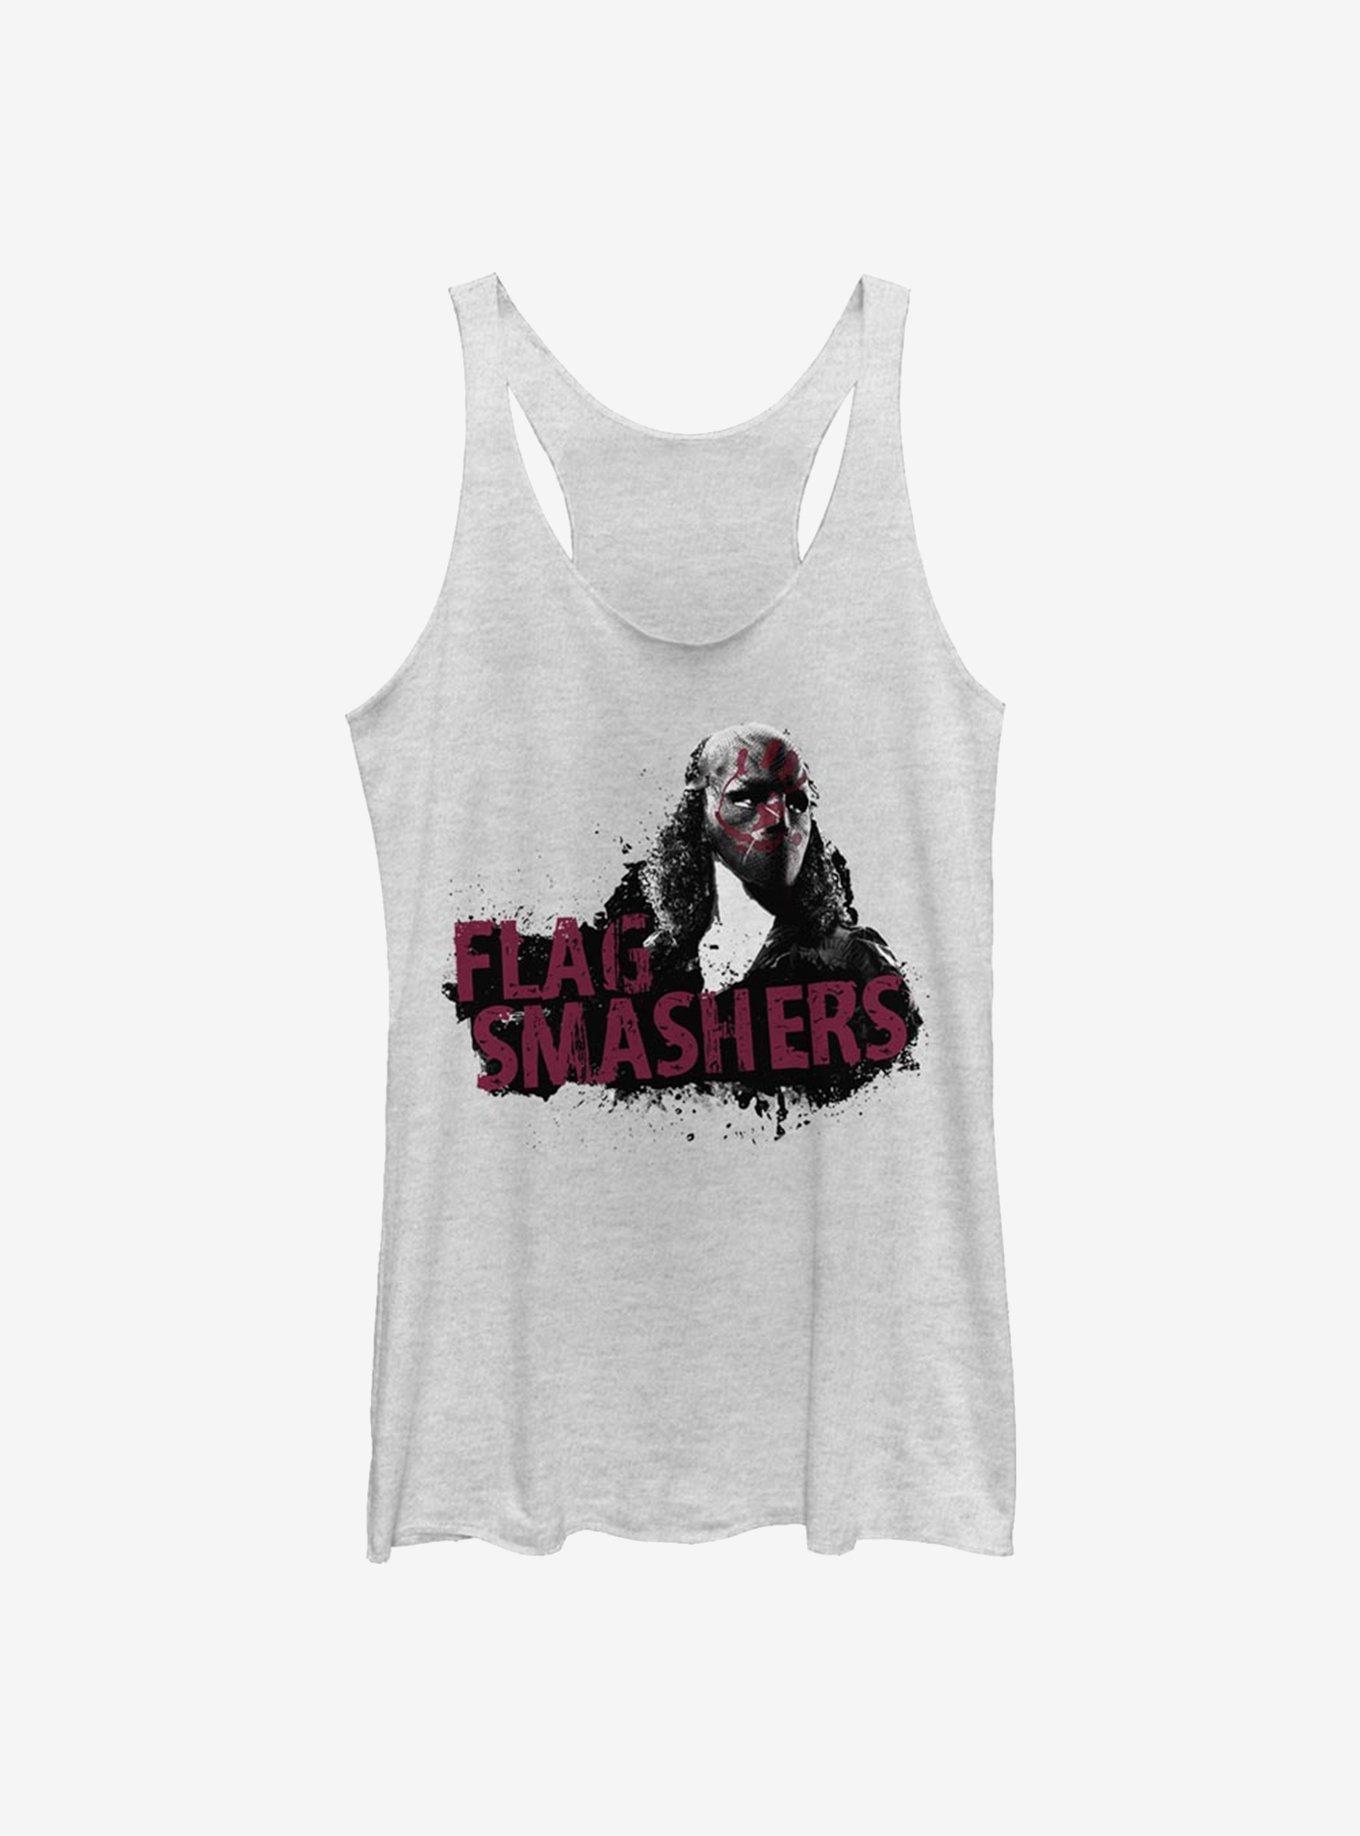 Marvel The Falcon And The Winter Soldier Flag Smashers Girls Tank, WHITE HTR, hi-res